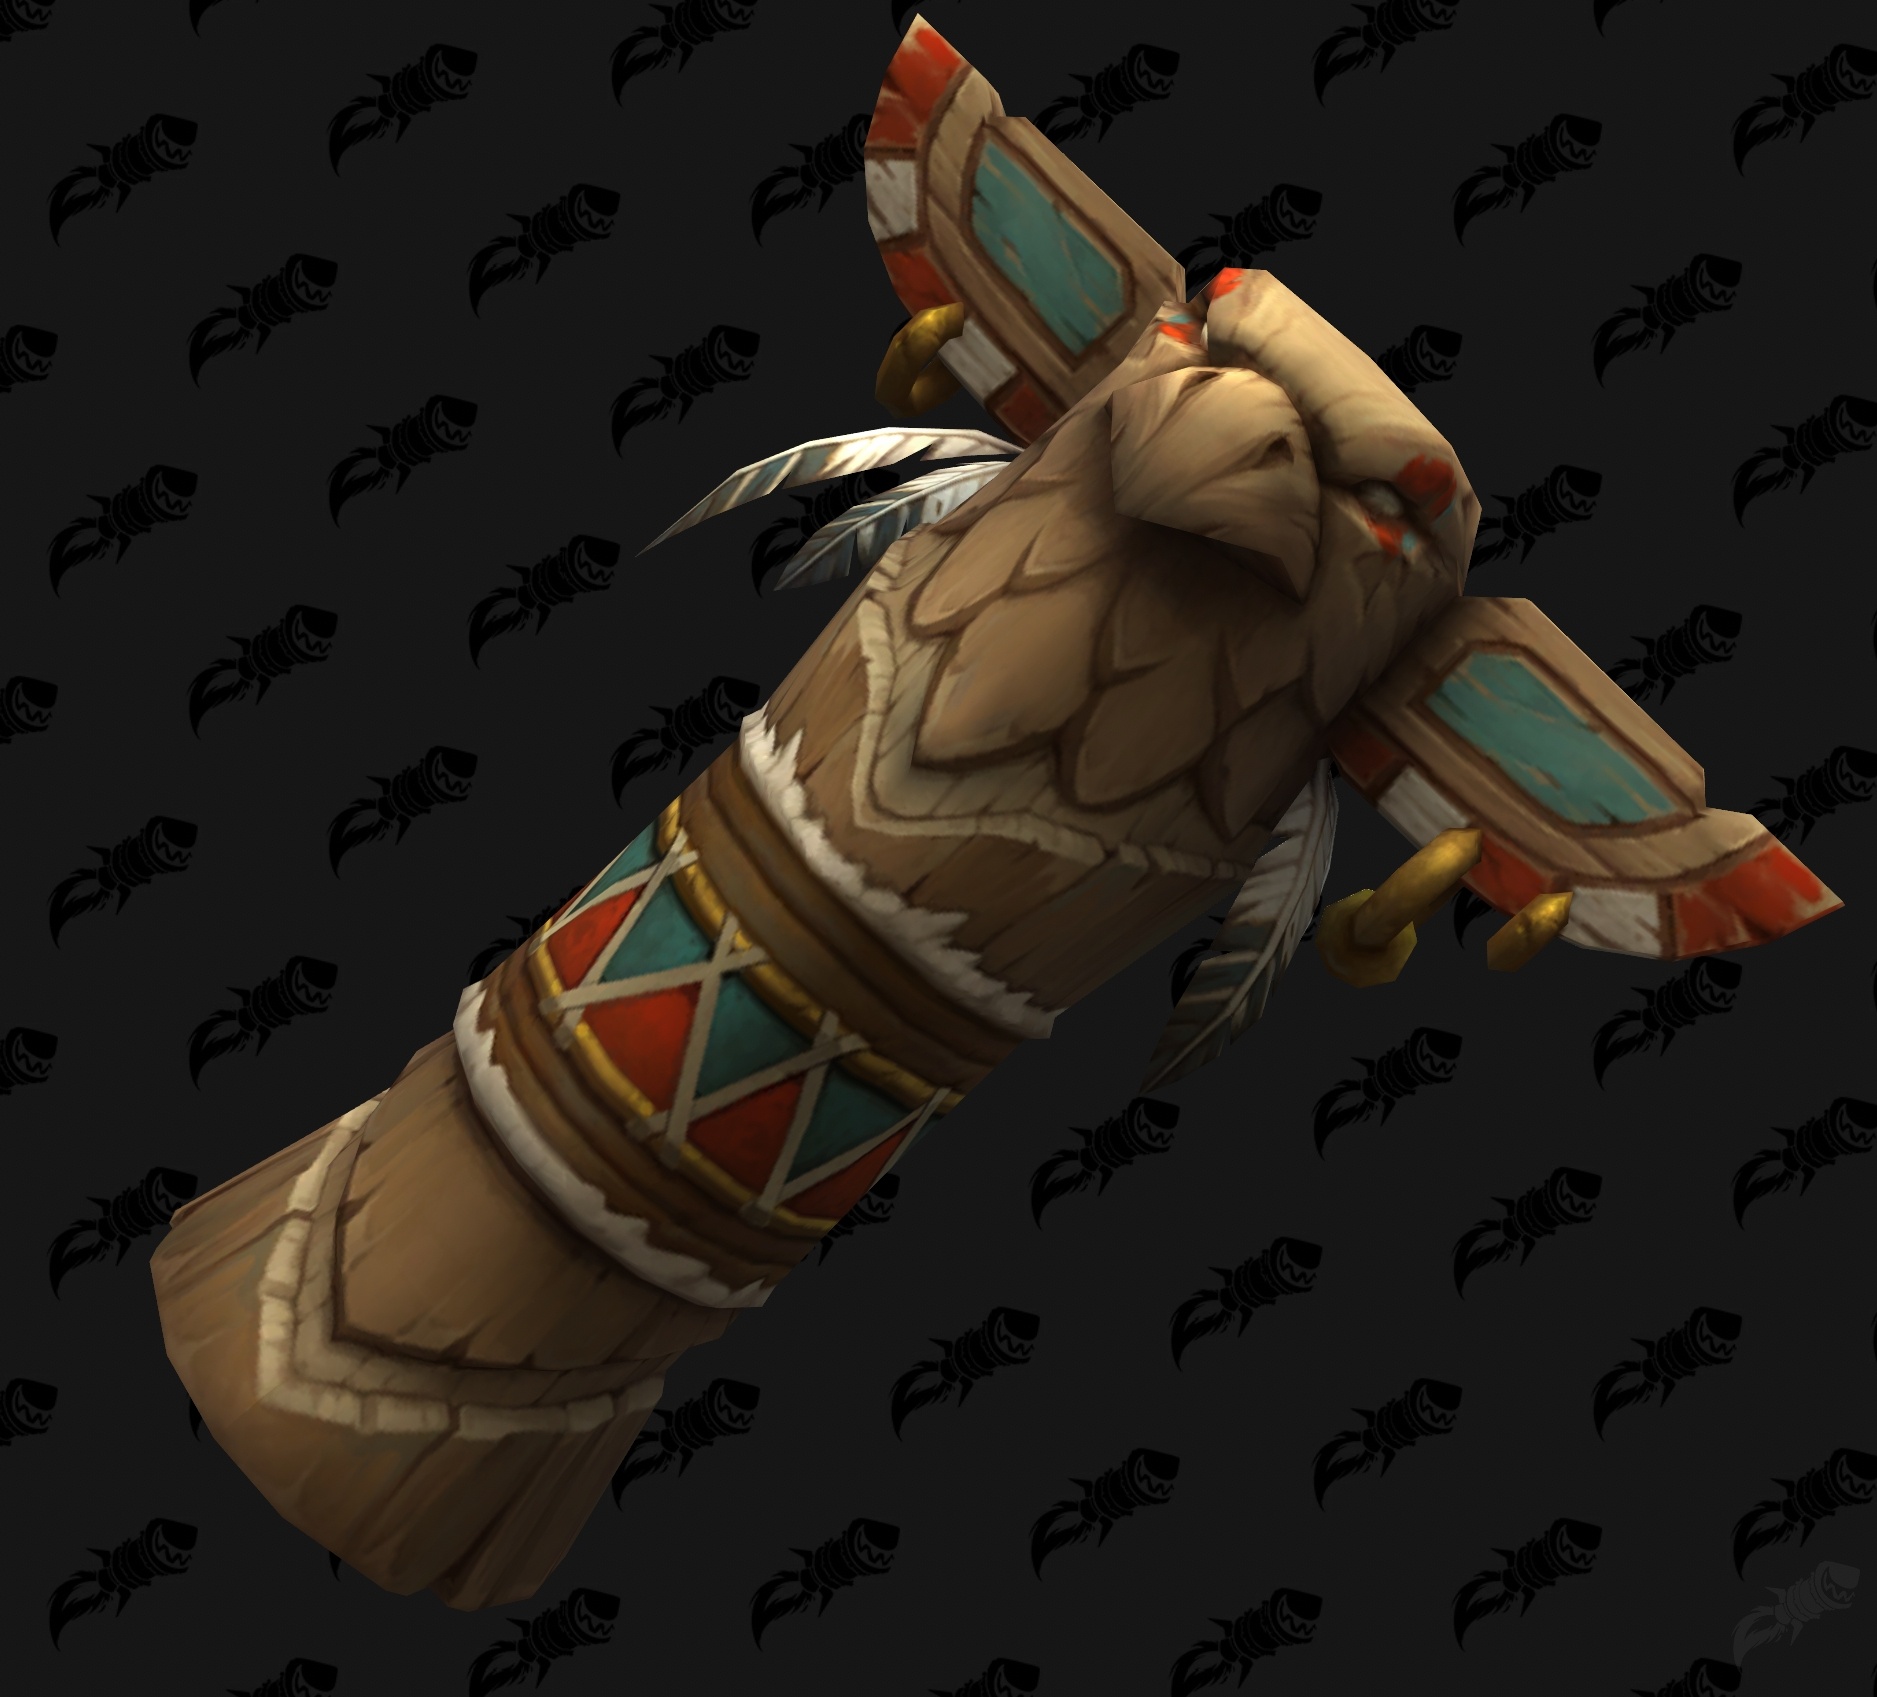 Datamining Hints Baine Bloodhoof's Story Continues in Future Patch -  Possible Spoilers - Wowhead News